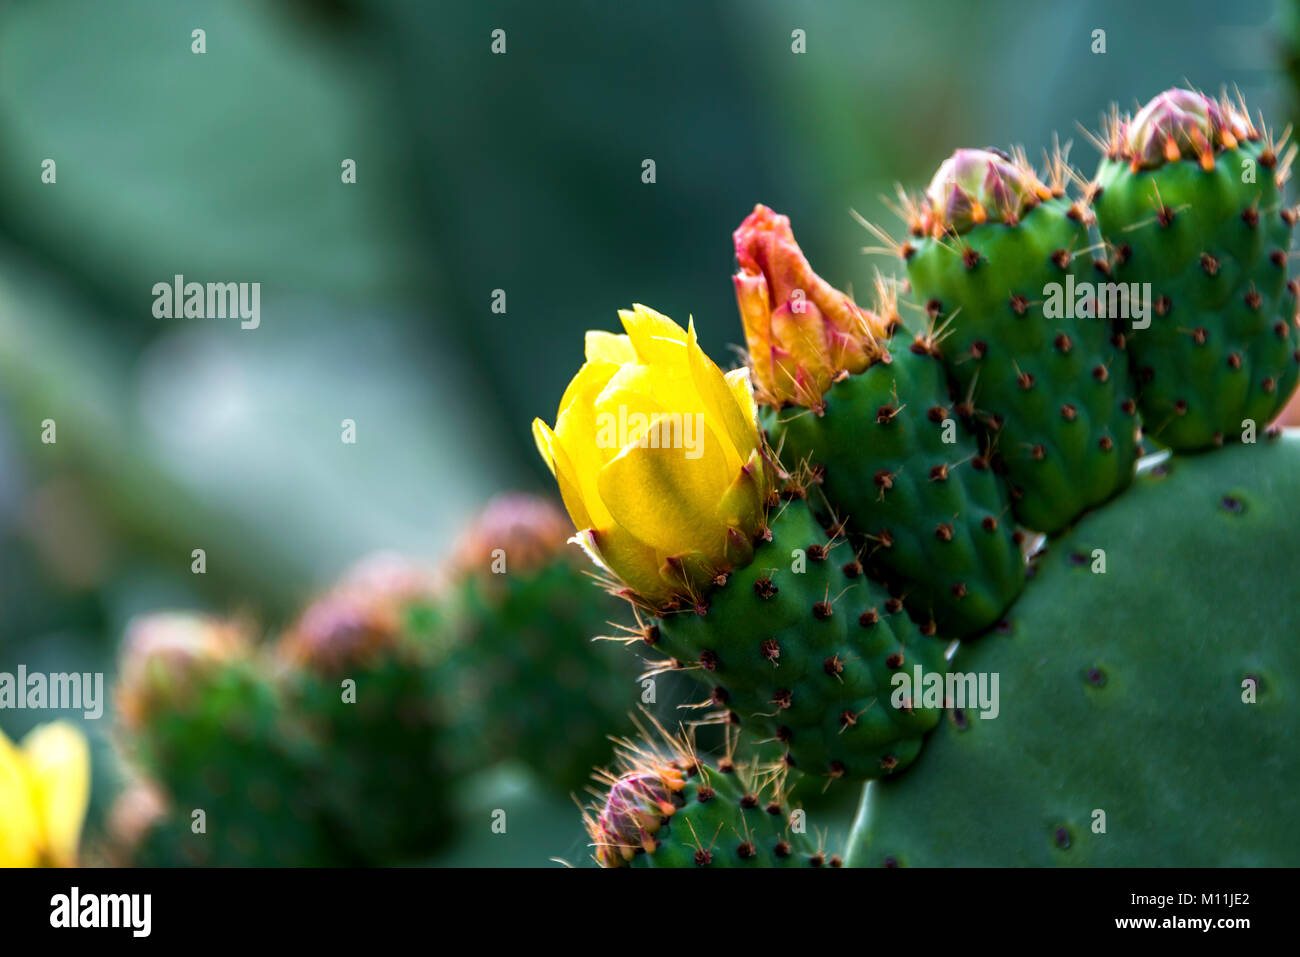 Close up image of Sicilian Cactus flower in bloom, also known as Opuntia ficus-indica or Cactus pear Stock Photo